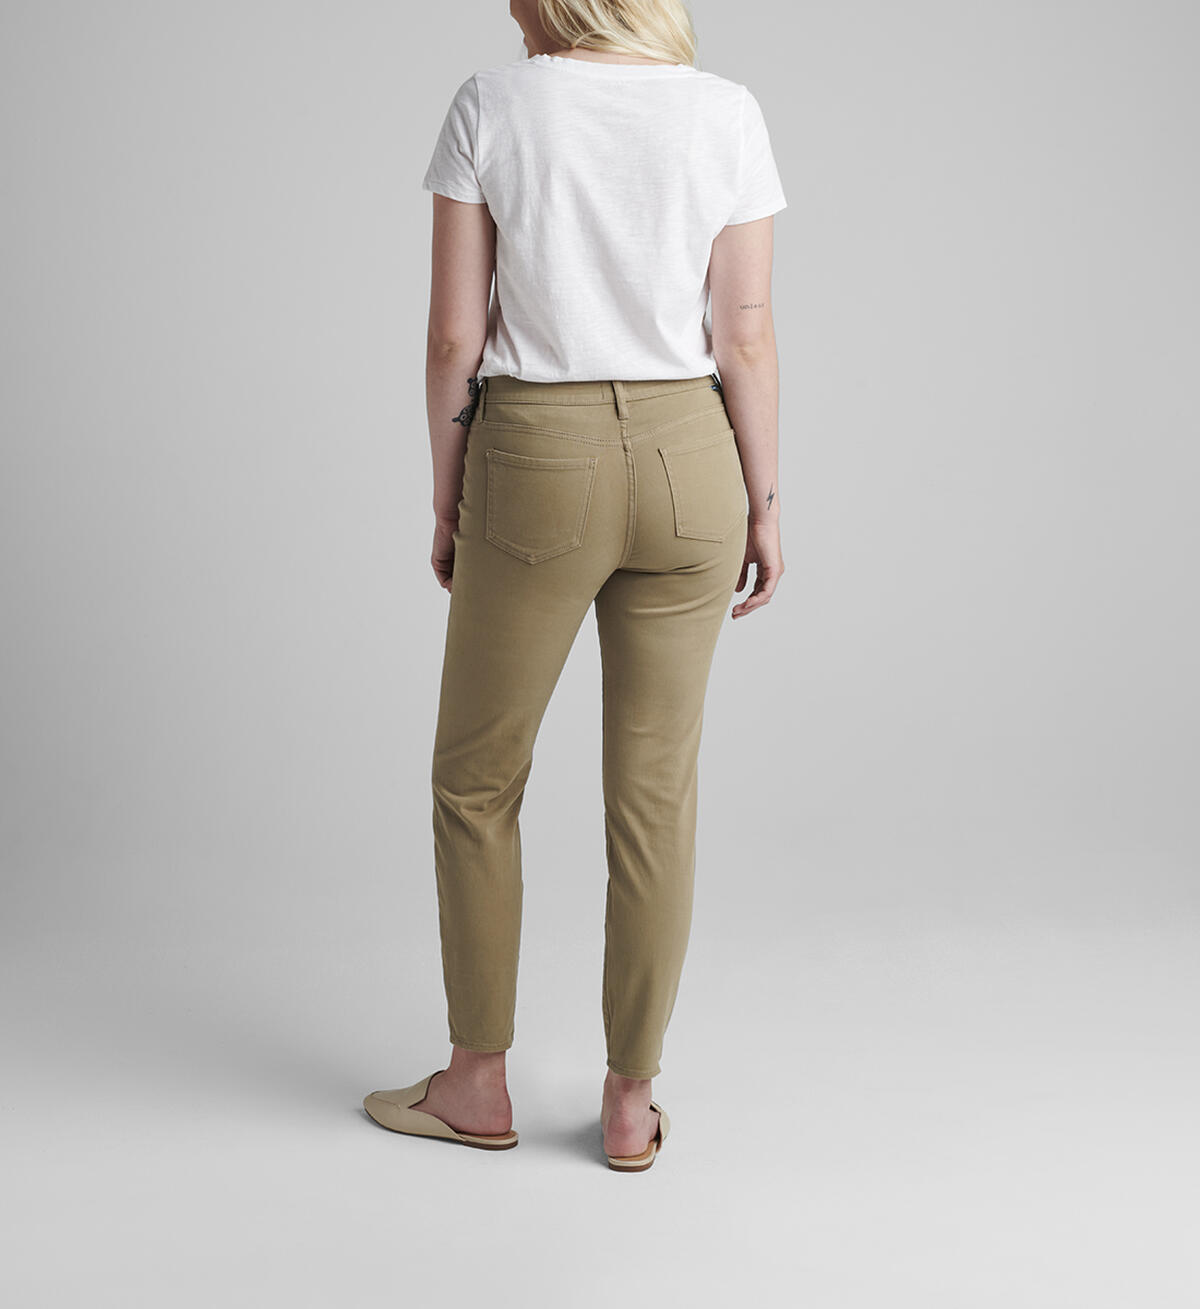 Cecilia Mid Rise Skinny Jeans, Chinchilla, hi-res image number 1